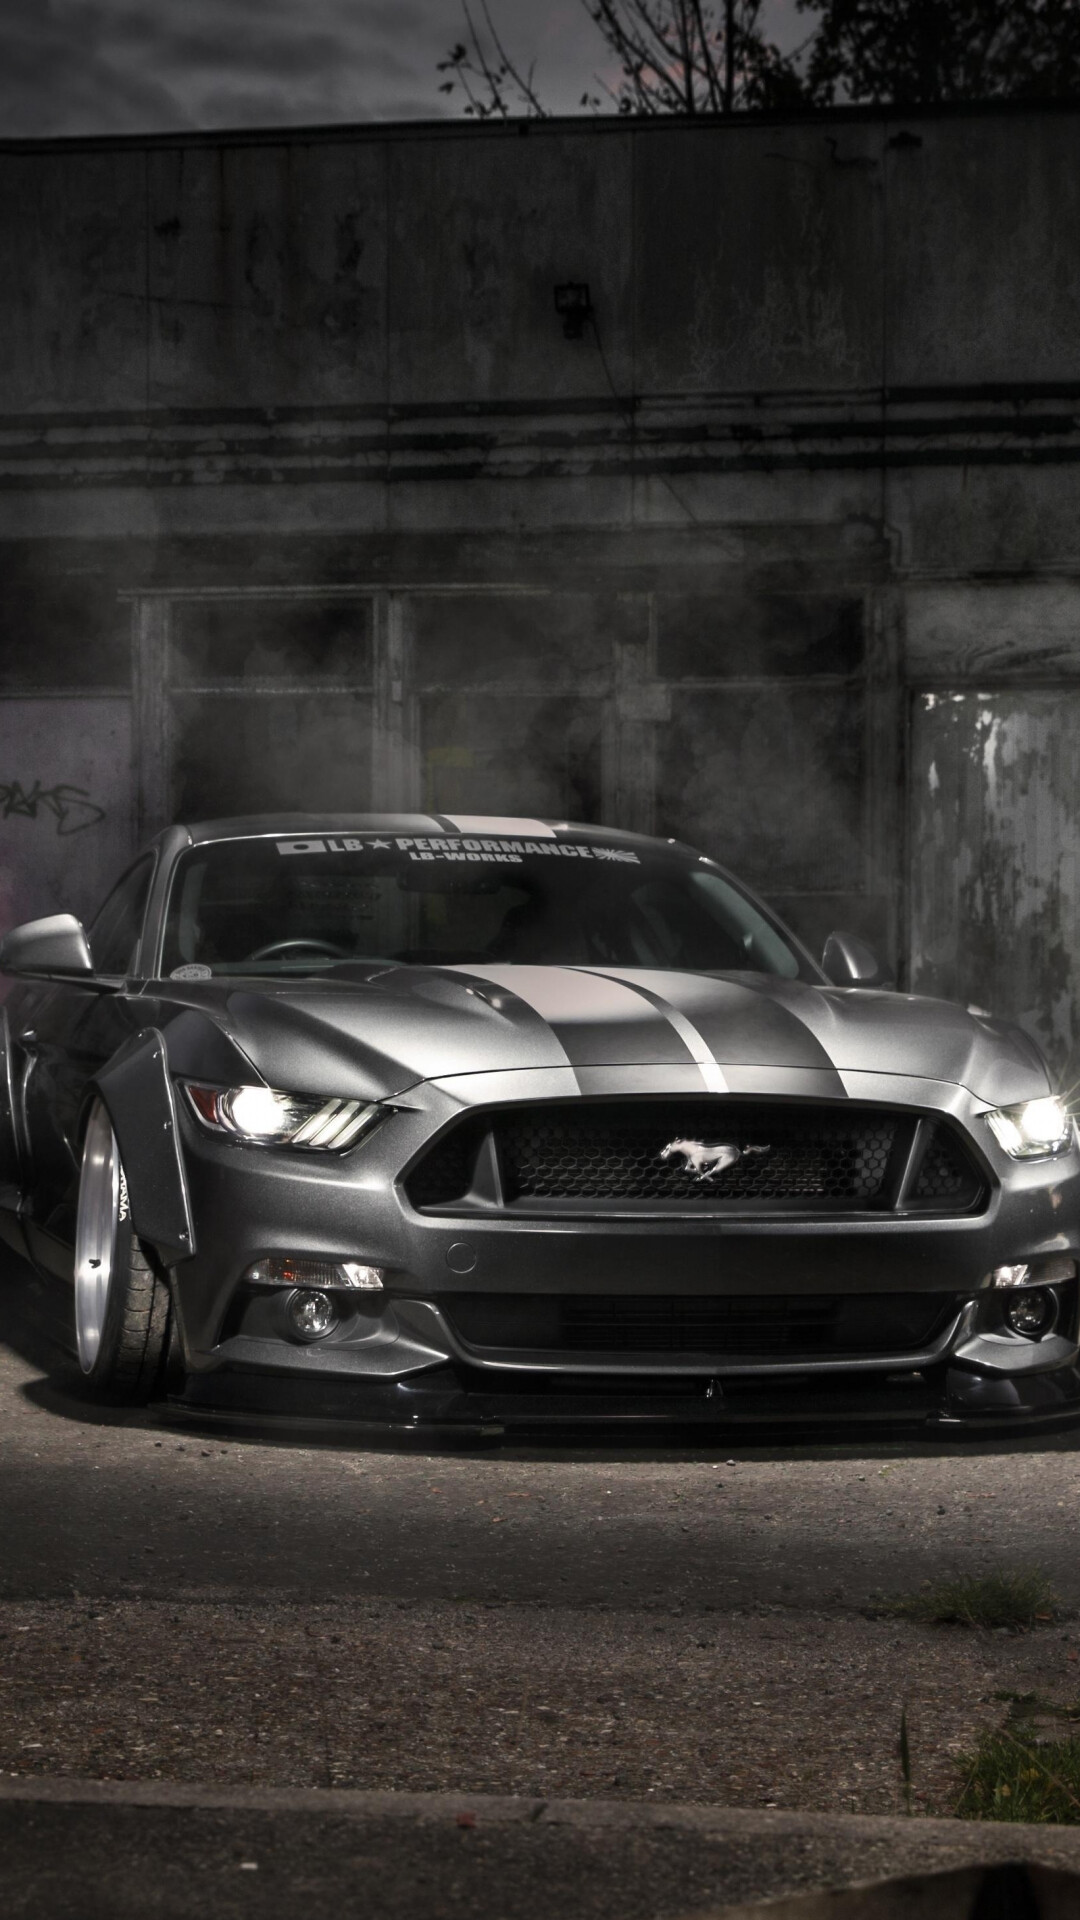 Ford: A 4 seater coupe, Muscle car, American automaker. 1080x1920 Full HD Wallpaper.